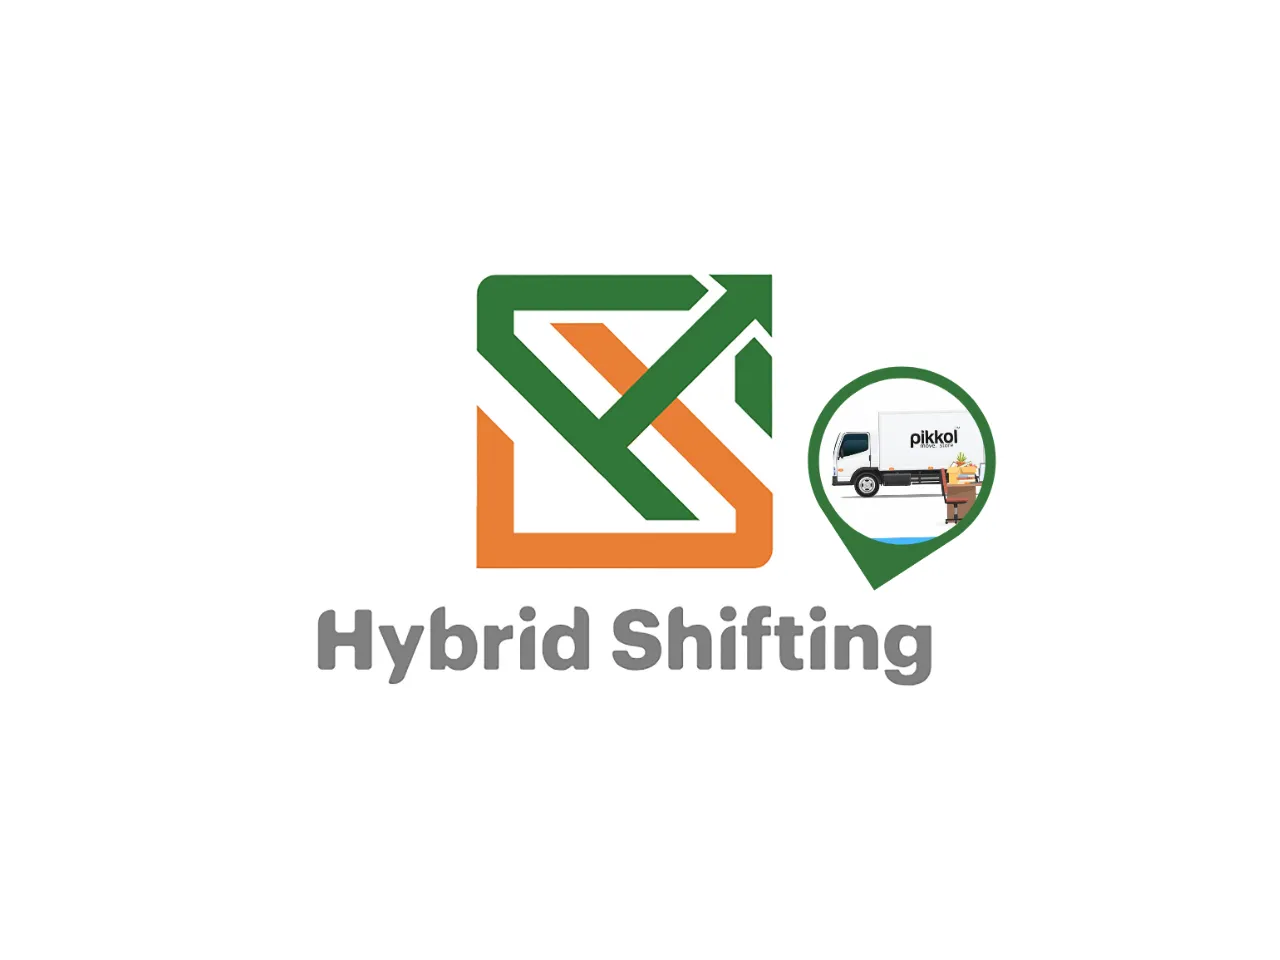 Hybrid Shifting acquires Pikkol 